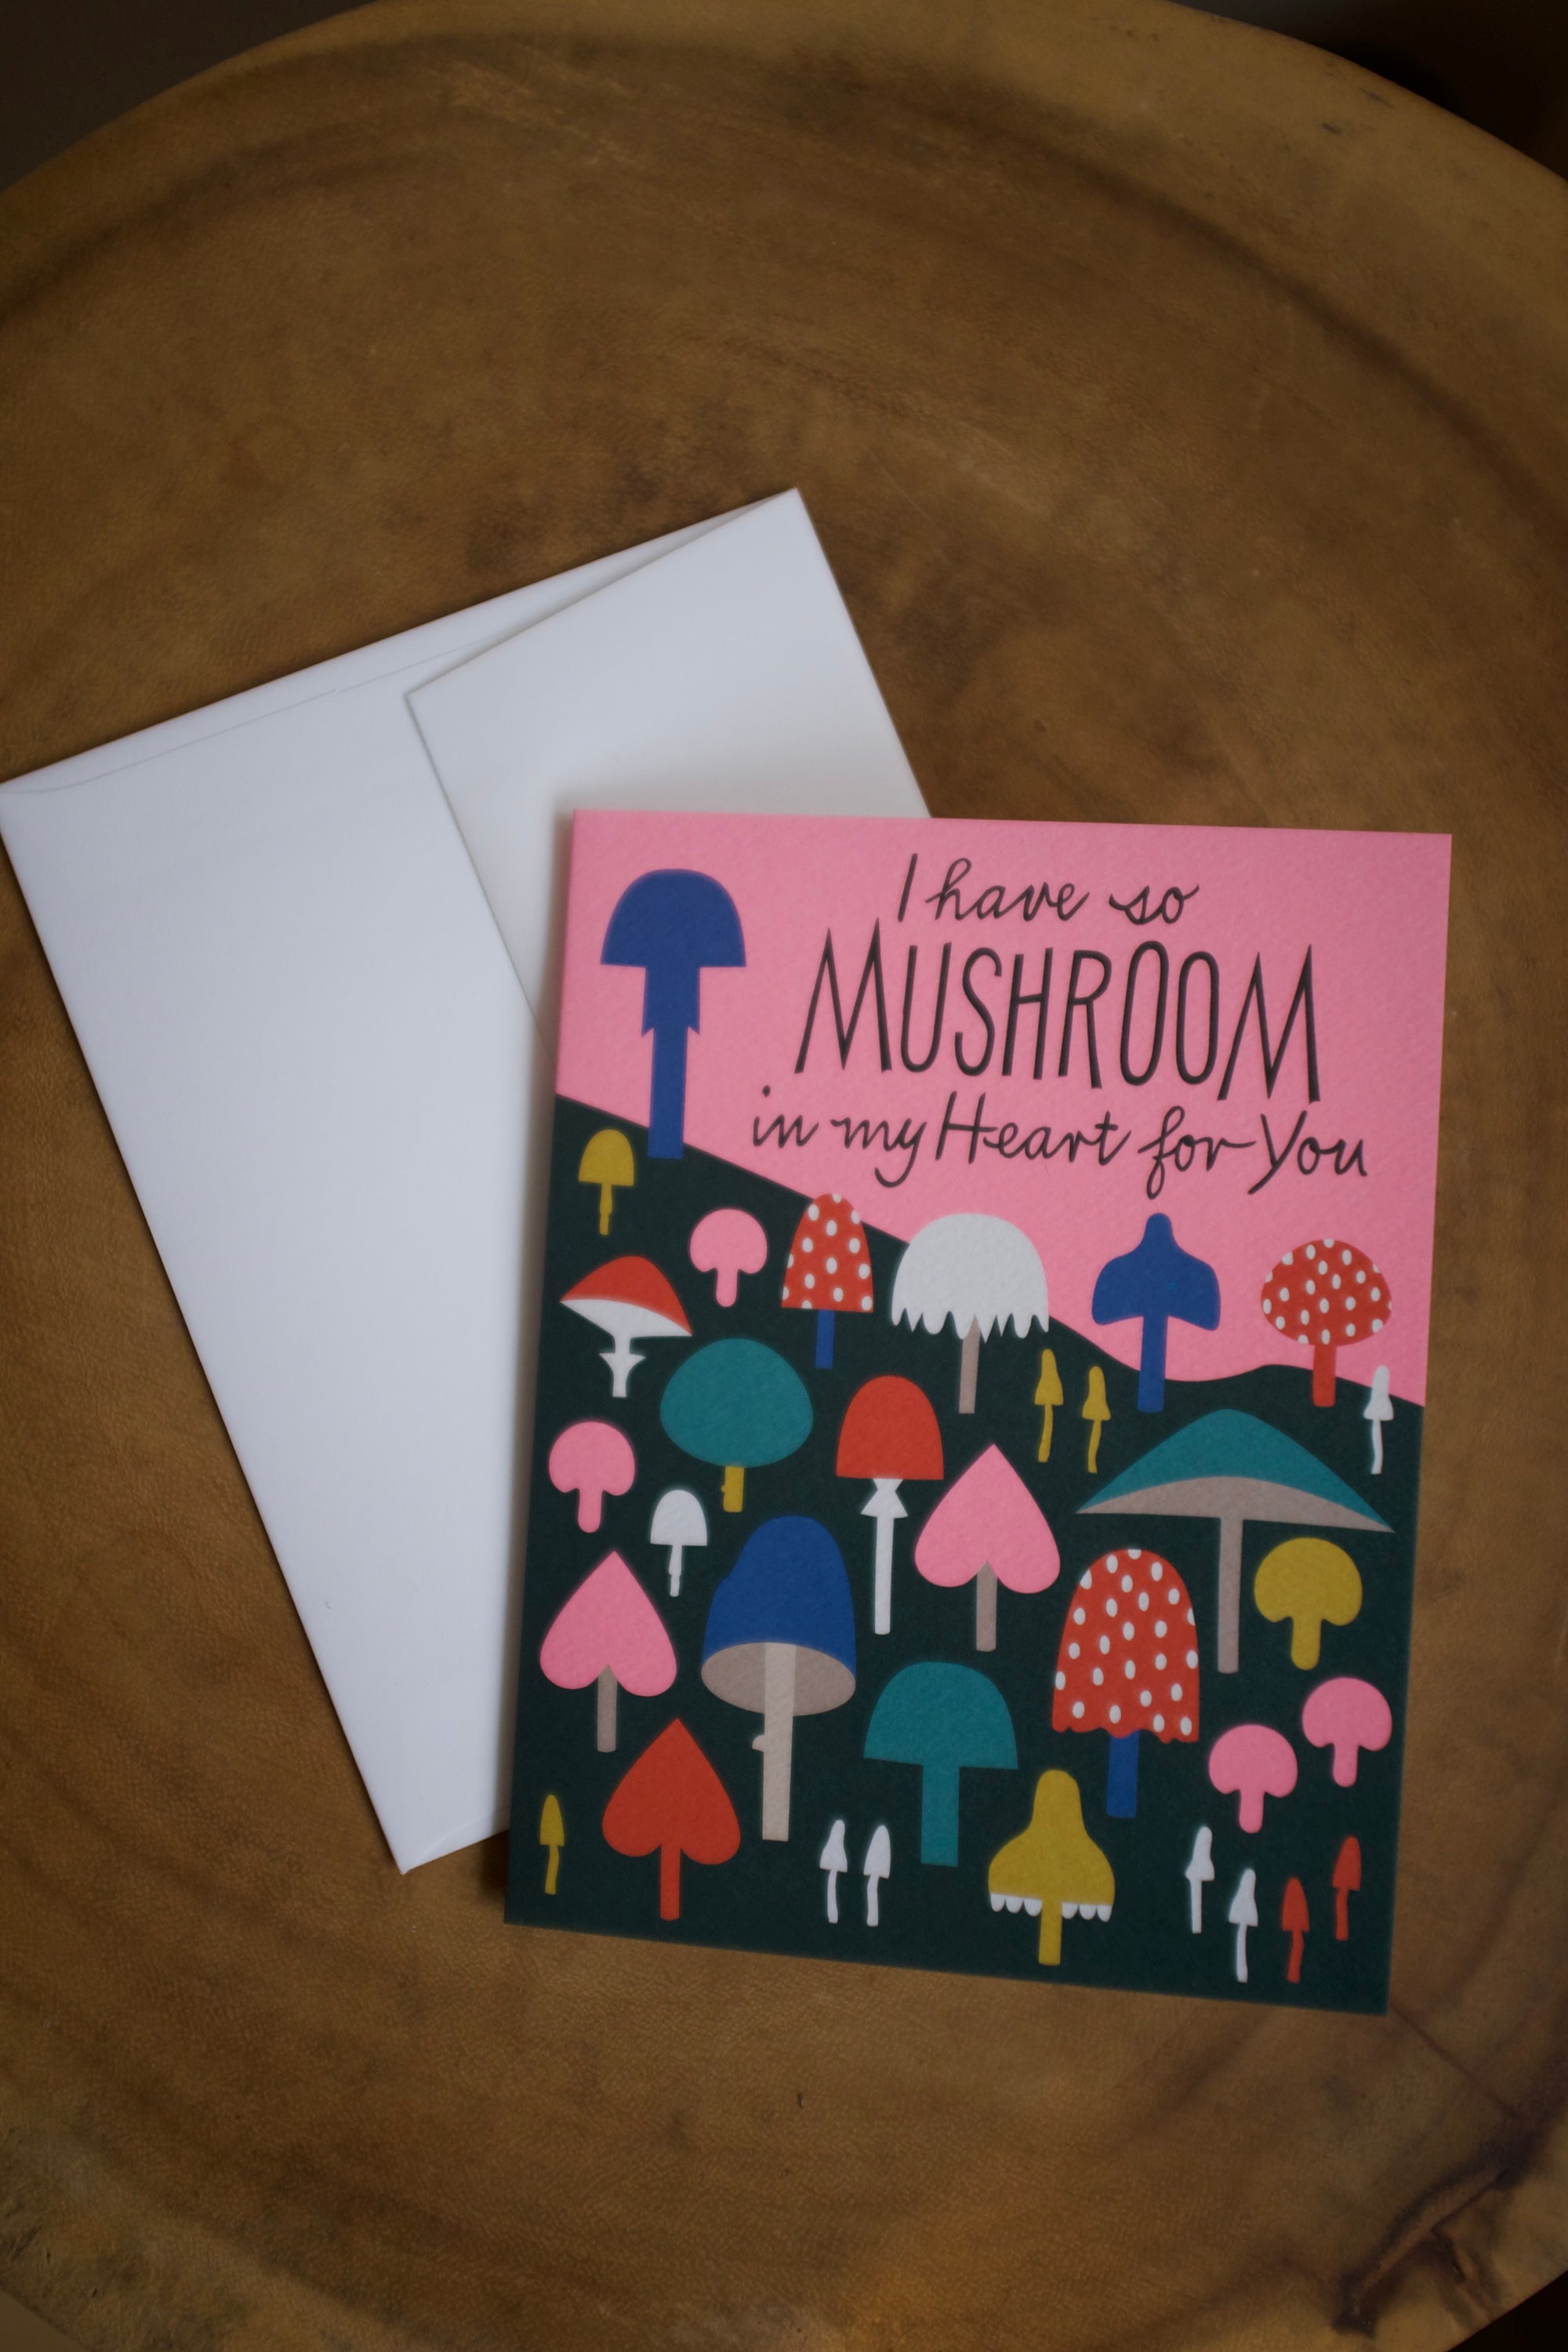 Banquet Note Card / I Have Mushroom In My HeartBanquet Note Card / I Have Mushroom In My Heart